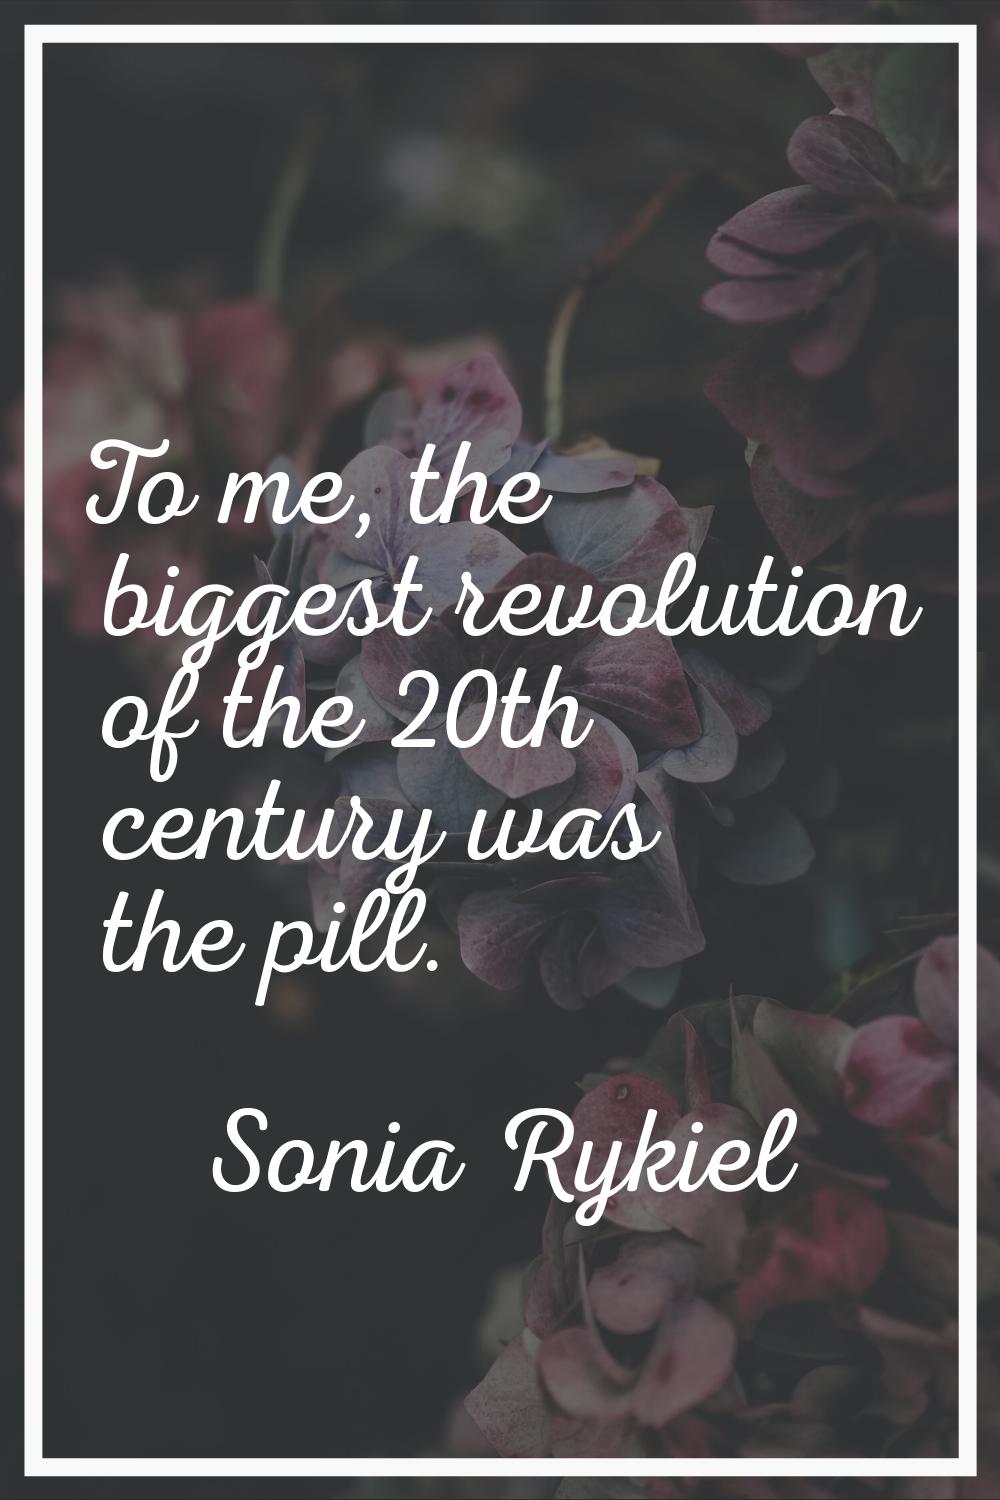 To me, the biggest revolution of the 20th century was the pill.